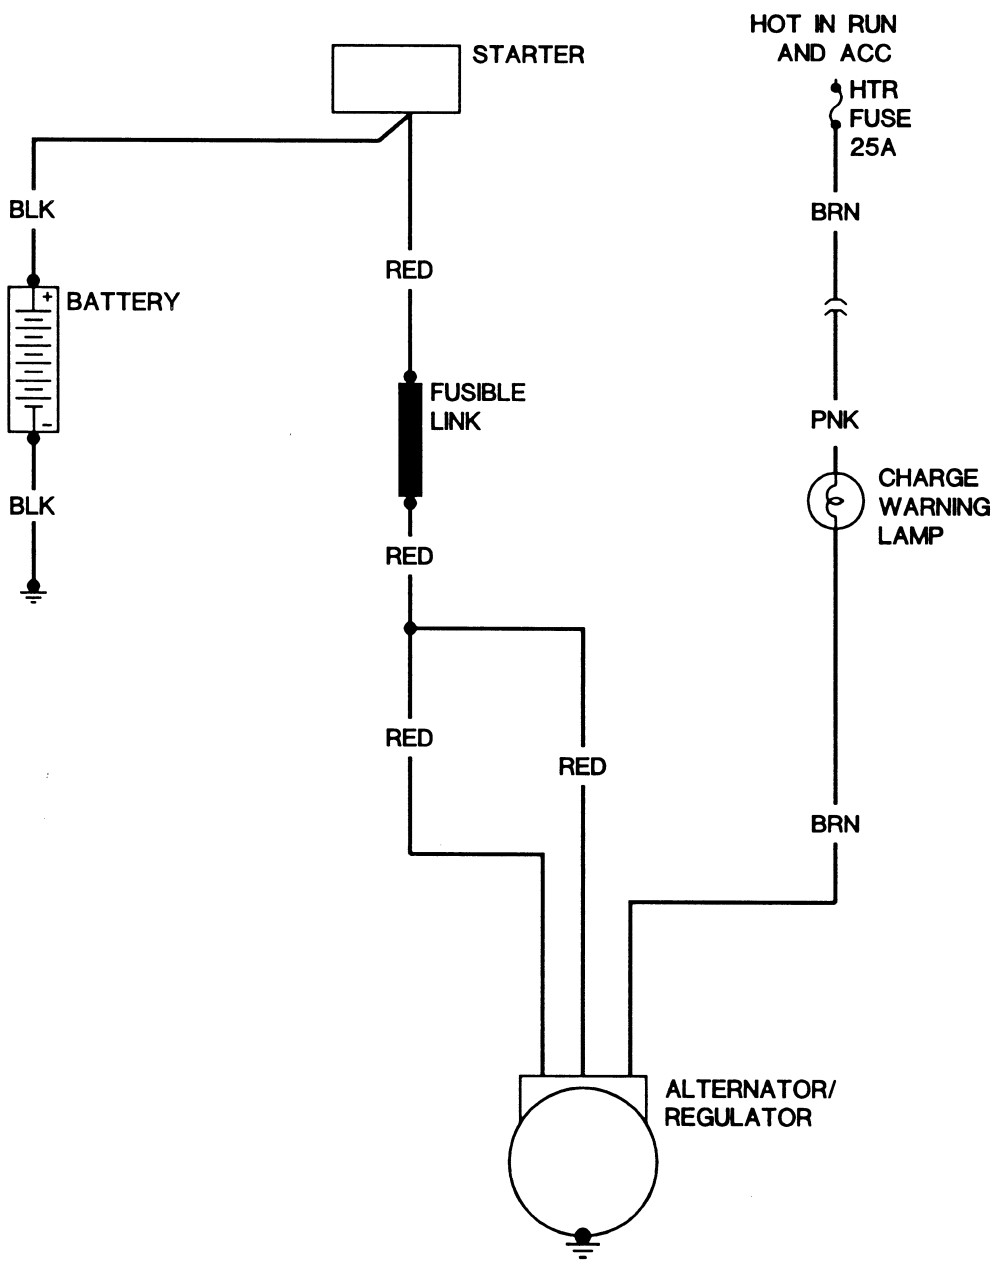 Repair Guides Wiring Diagrams Wiring Diagrams Autozone Chevy Charging System Wiring 8 Chevy Charging System Wiring